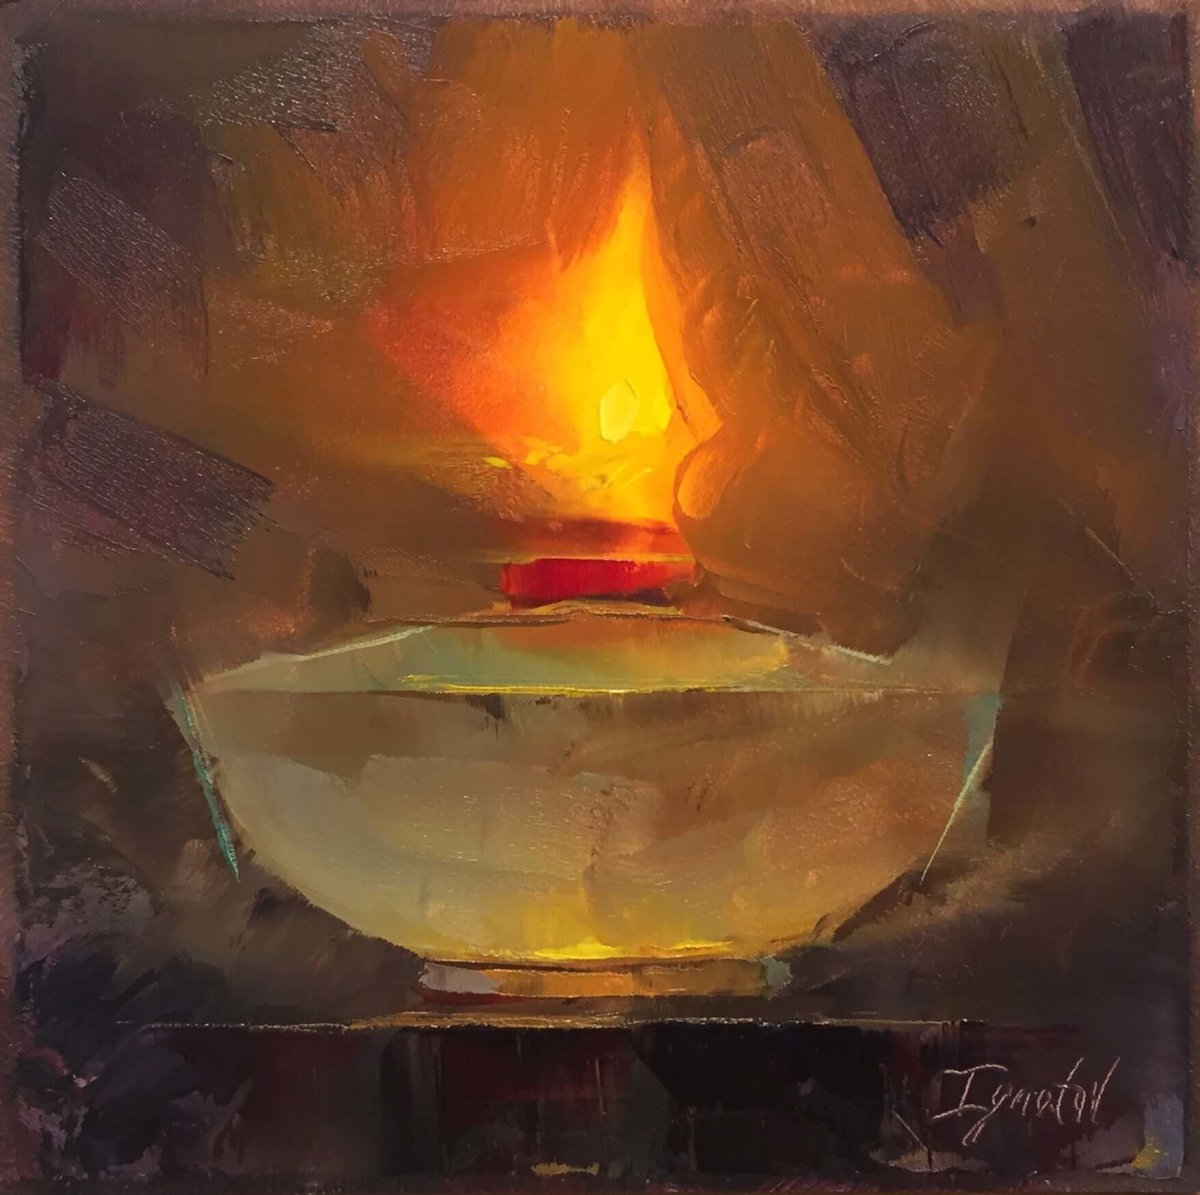 Opalescence by Ignat Ignatov at LePrince Galleries